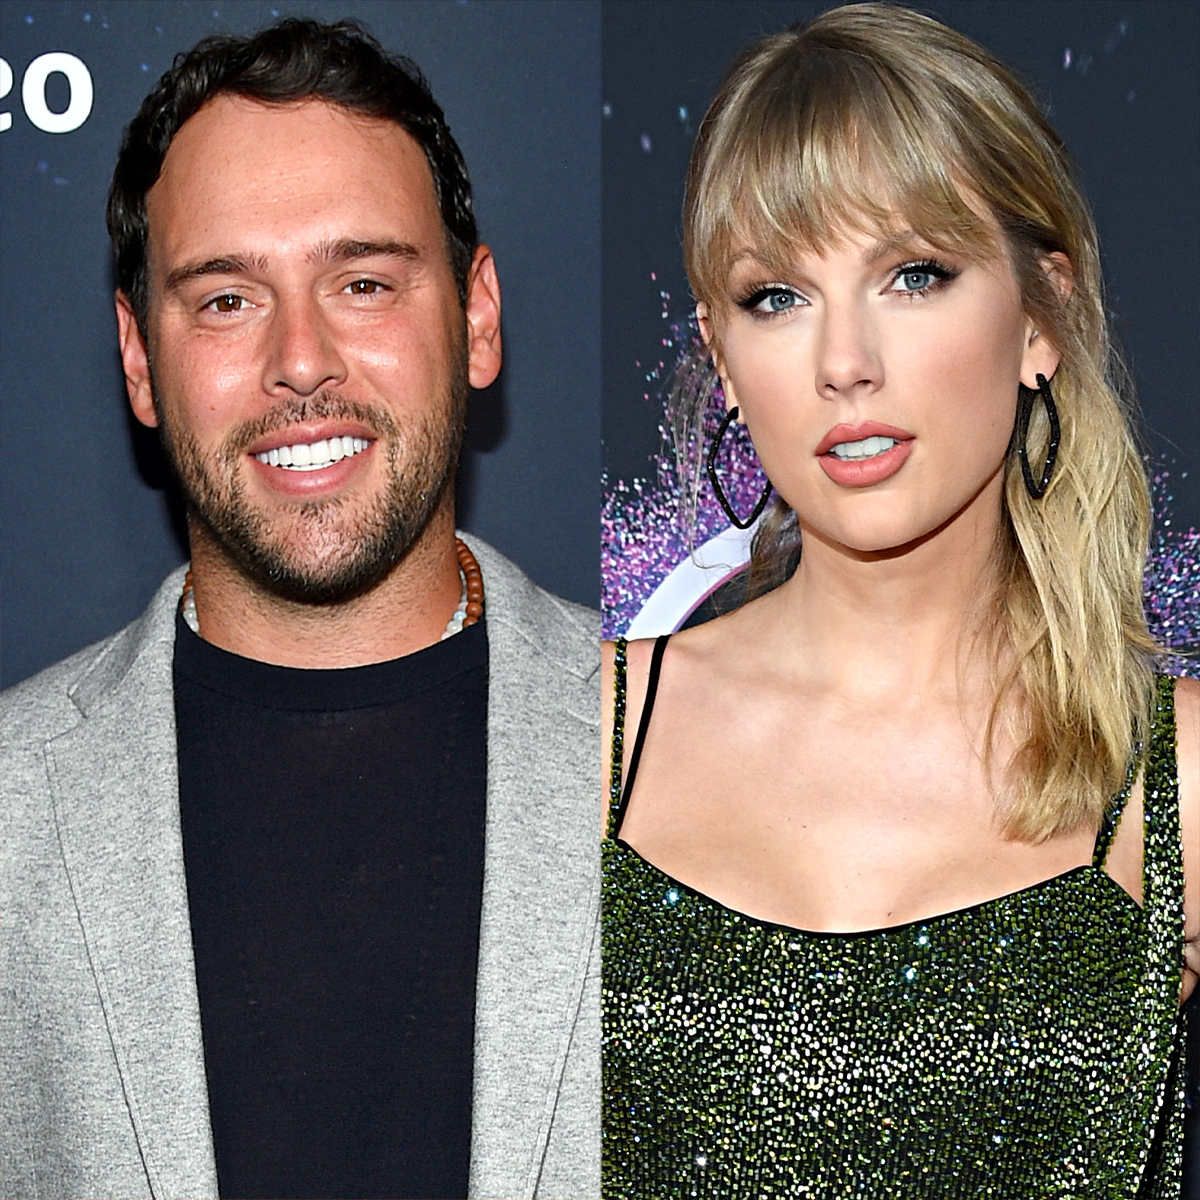 rod møl Engel Why Scooter Braun Has “Regret" Over His Music Battle WIth Taylor Swift - E!  Online